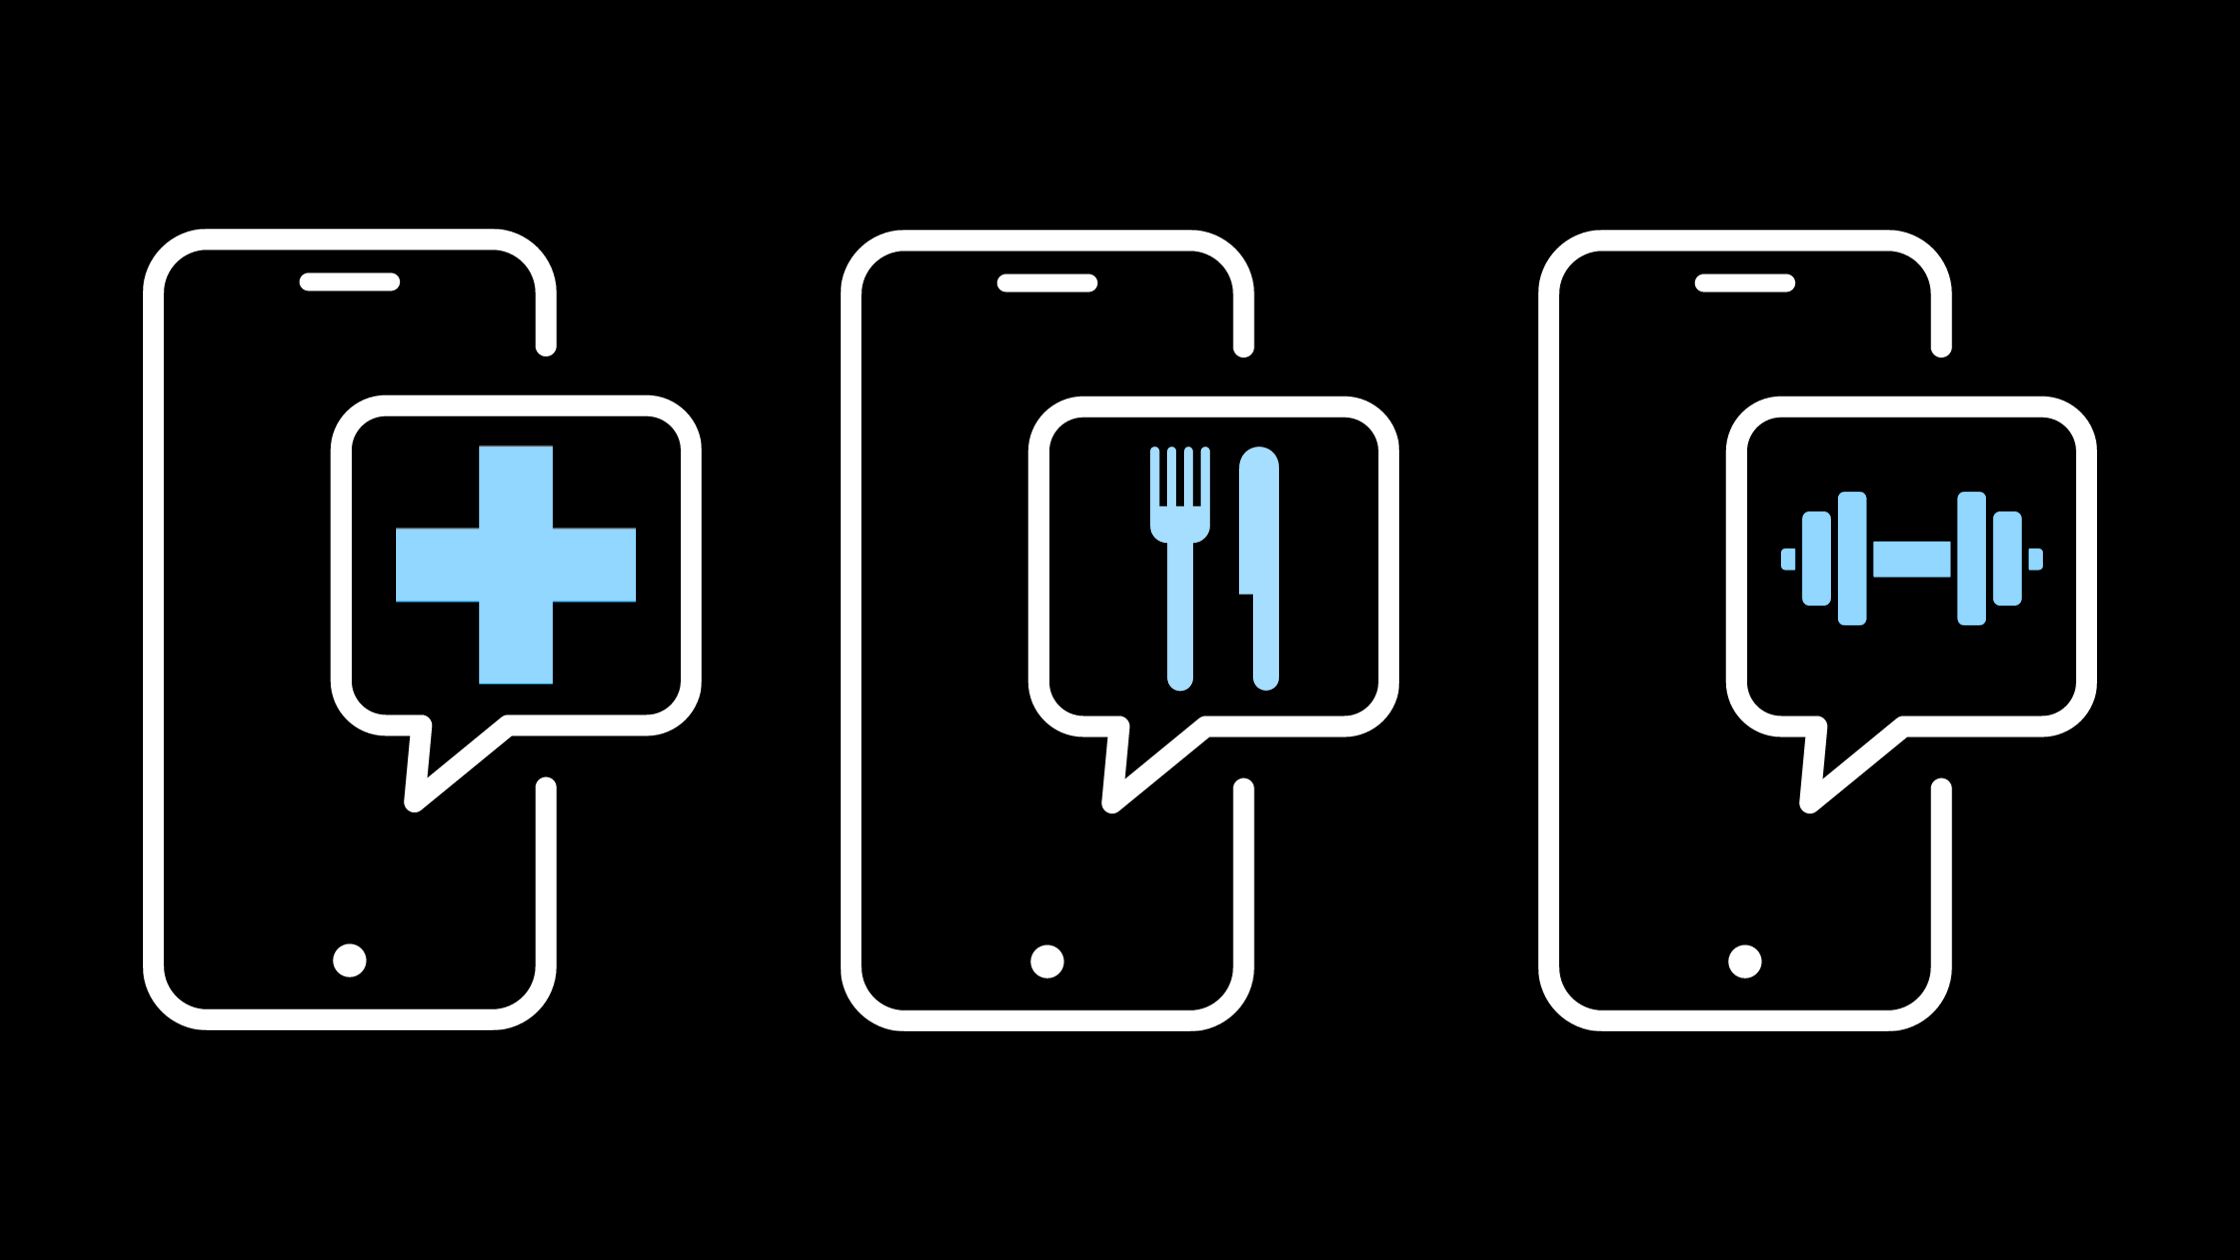 Graphic of 3 phones with SMS text bubbles: one with a hospital cross, one with a knife and fork and one with a dumbbell.